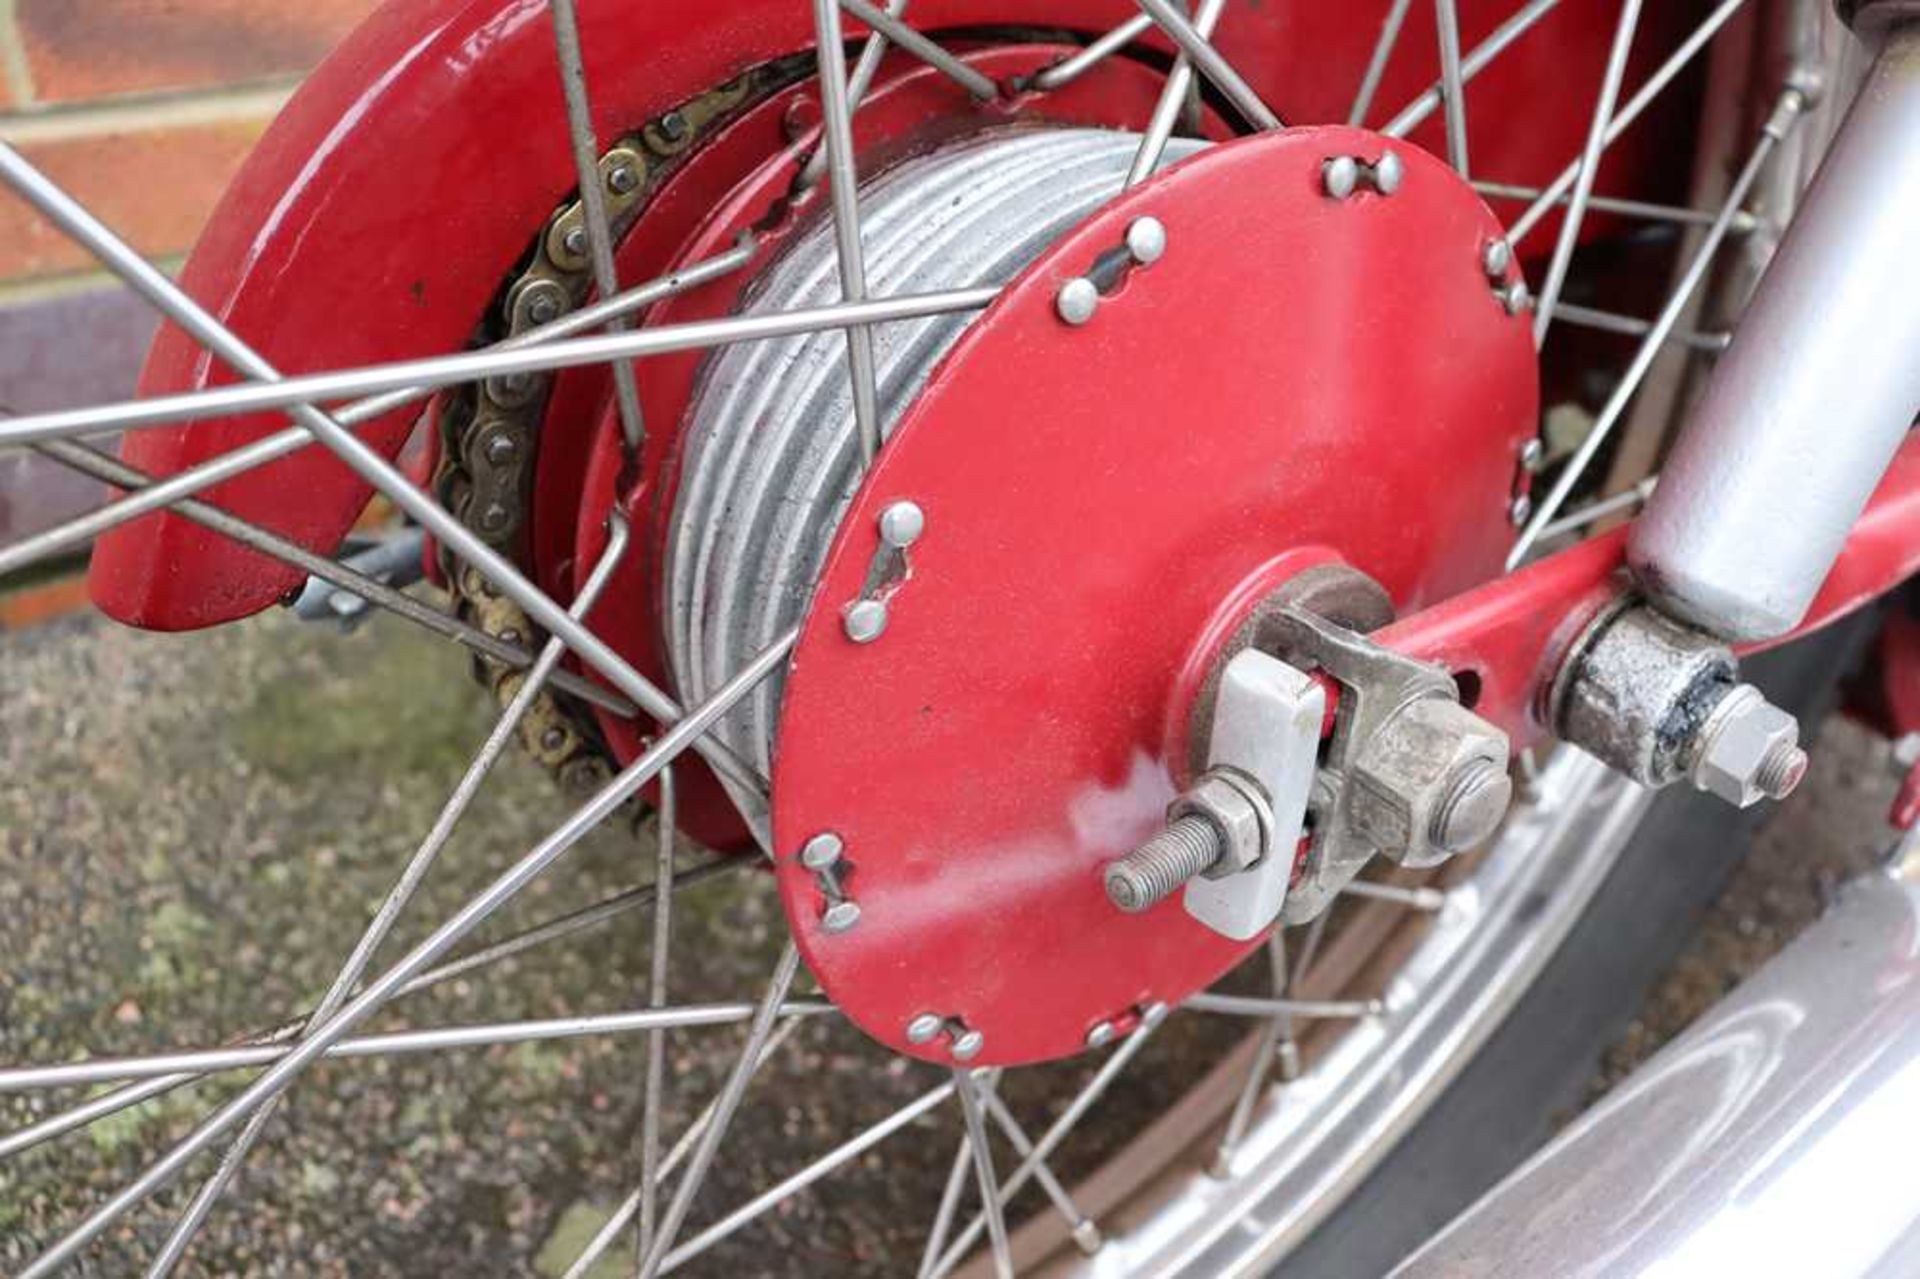 1956 BSA C12 Stainless steel rims and spokes - Image 30 of 44